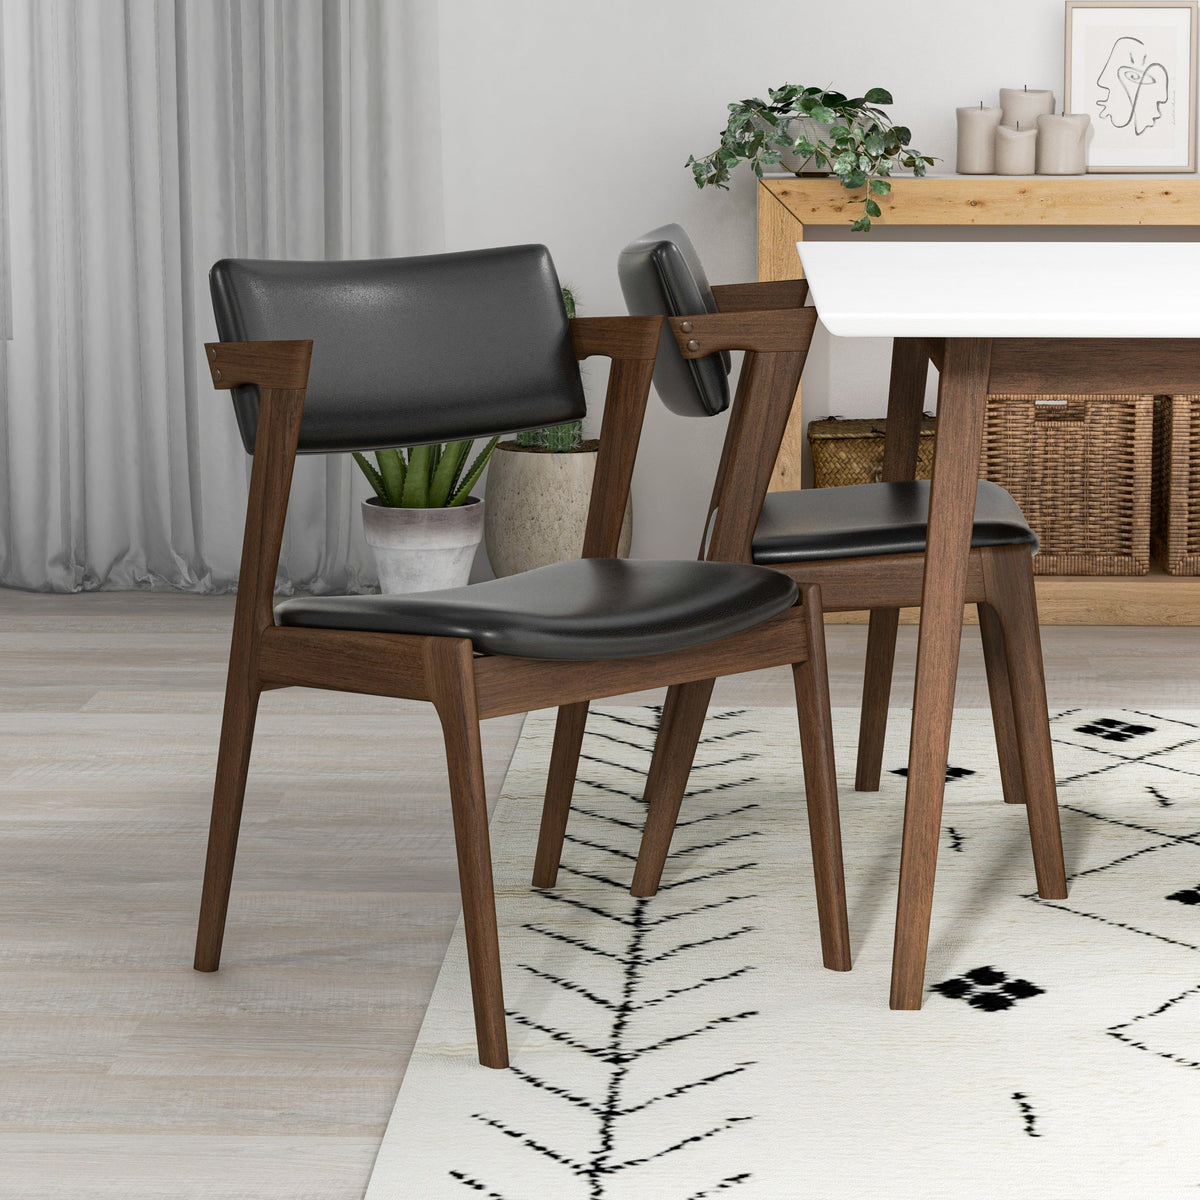 Adira Small White Top Dining Set - 4 Ricco Black Leather Chairs | MidinMod | TX | Best Furniture stores in Houston